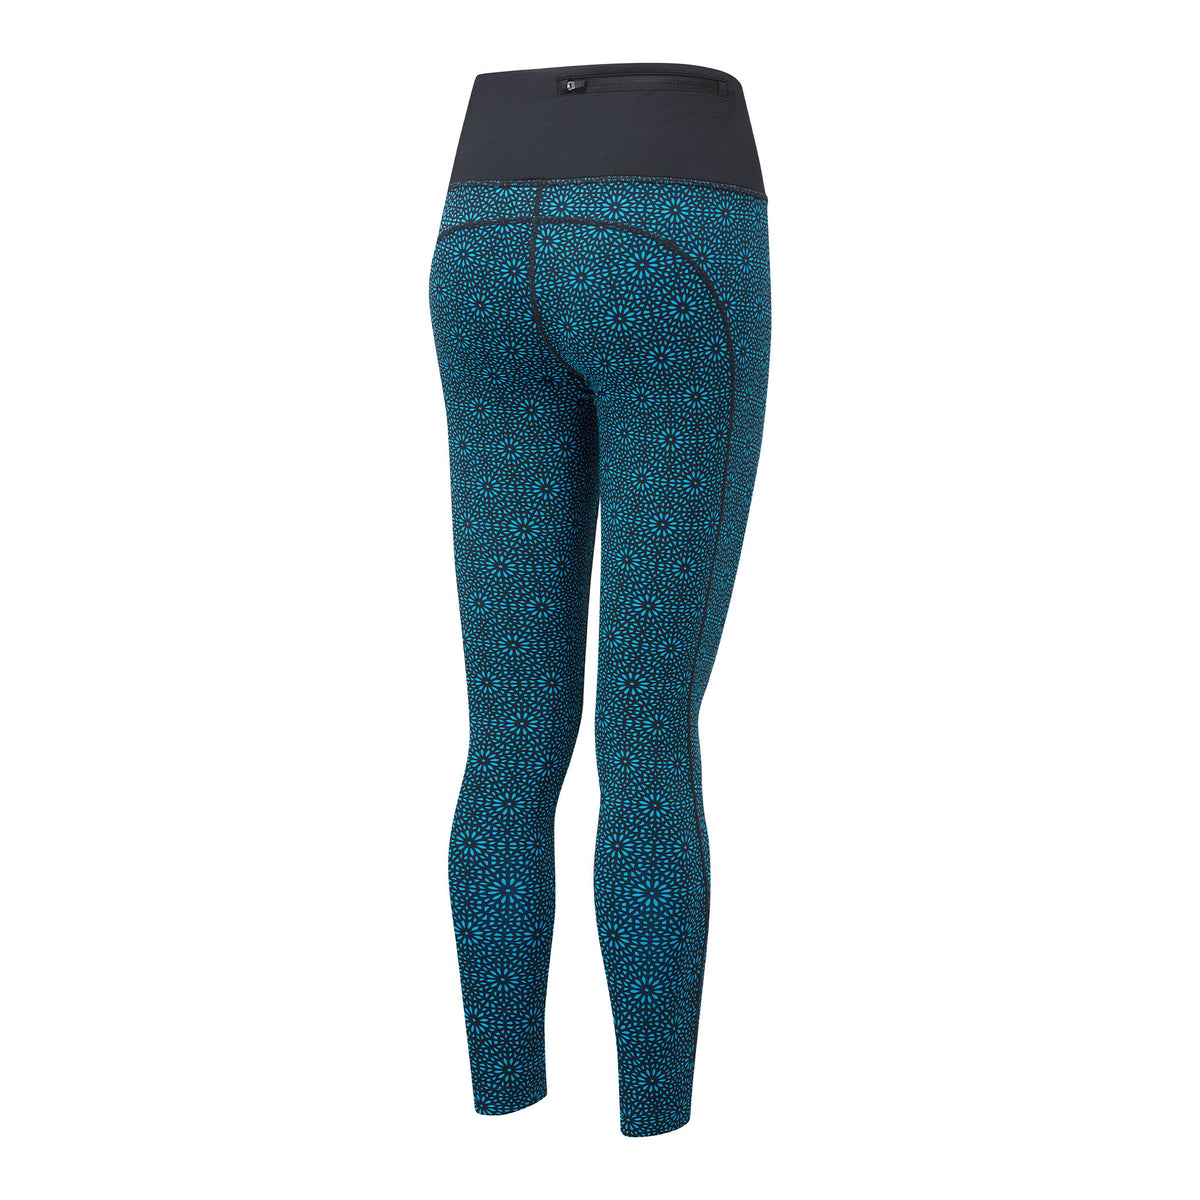 Ronhill Womens Life Tights: Kingfisher/Turkish Delight